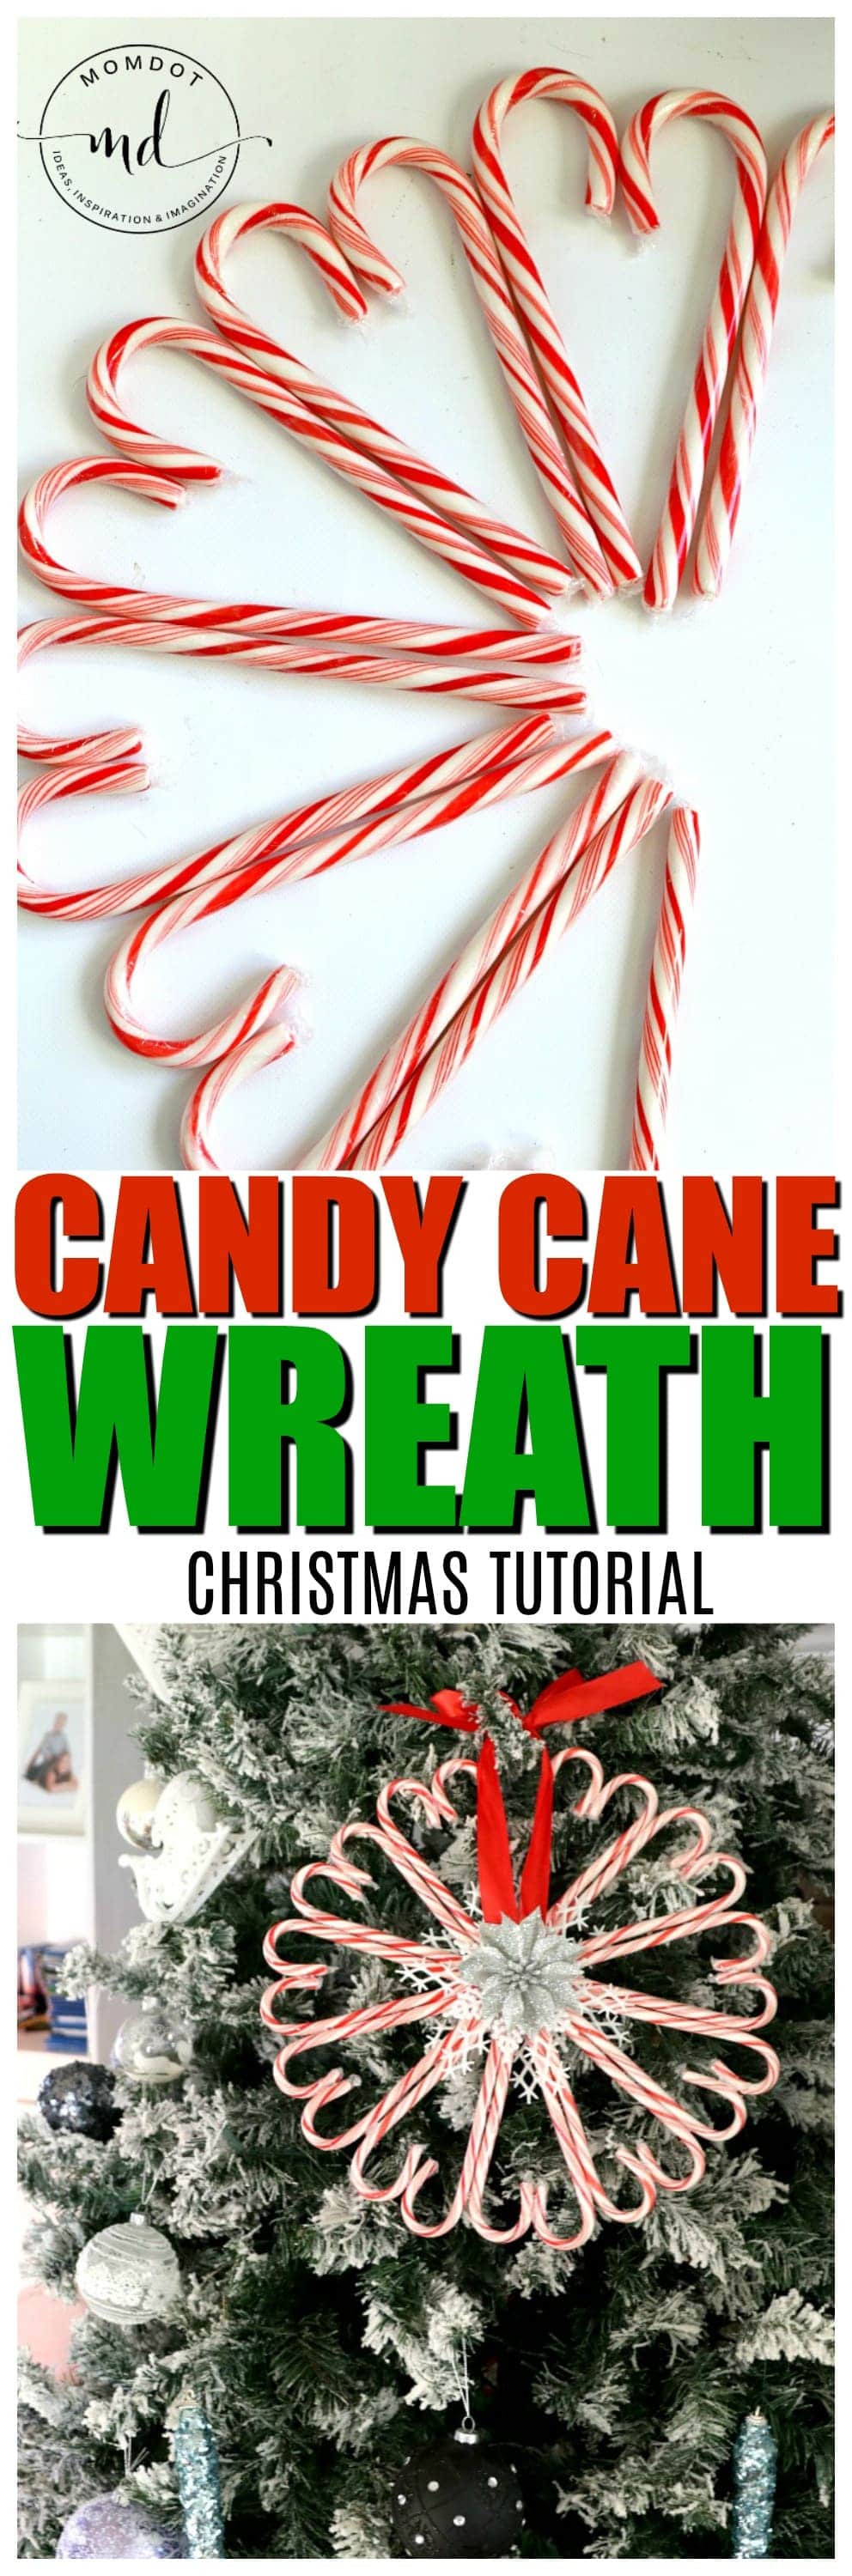 candy cane wreath instructions